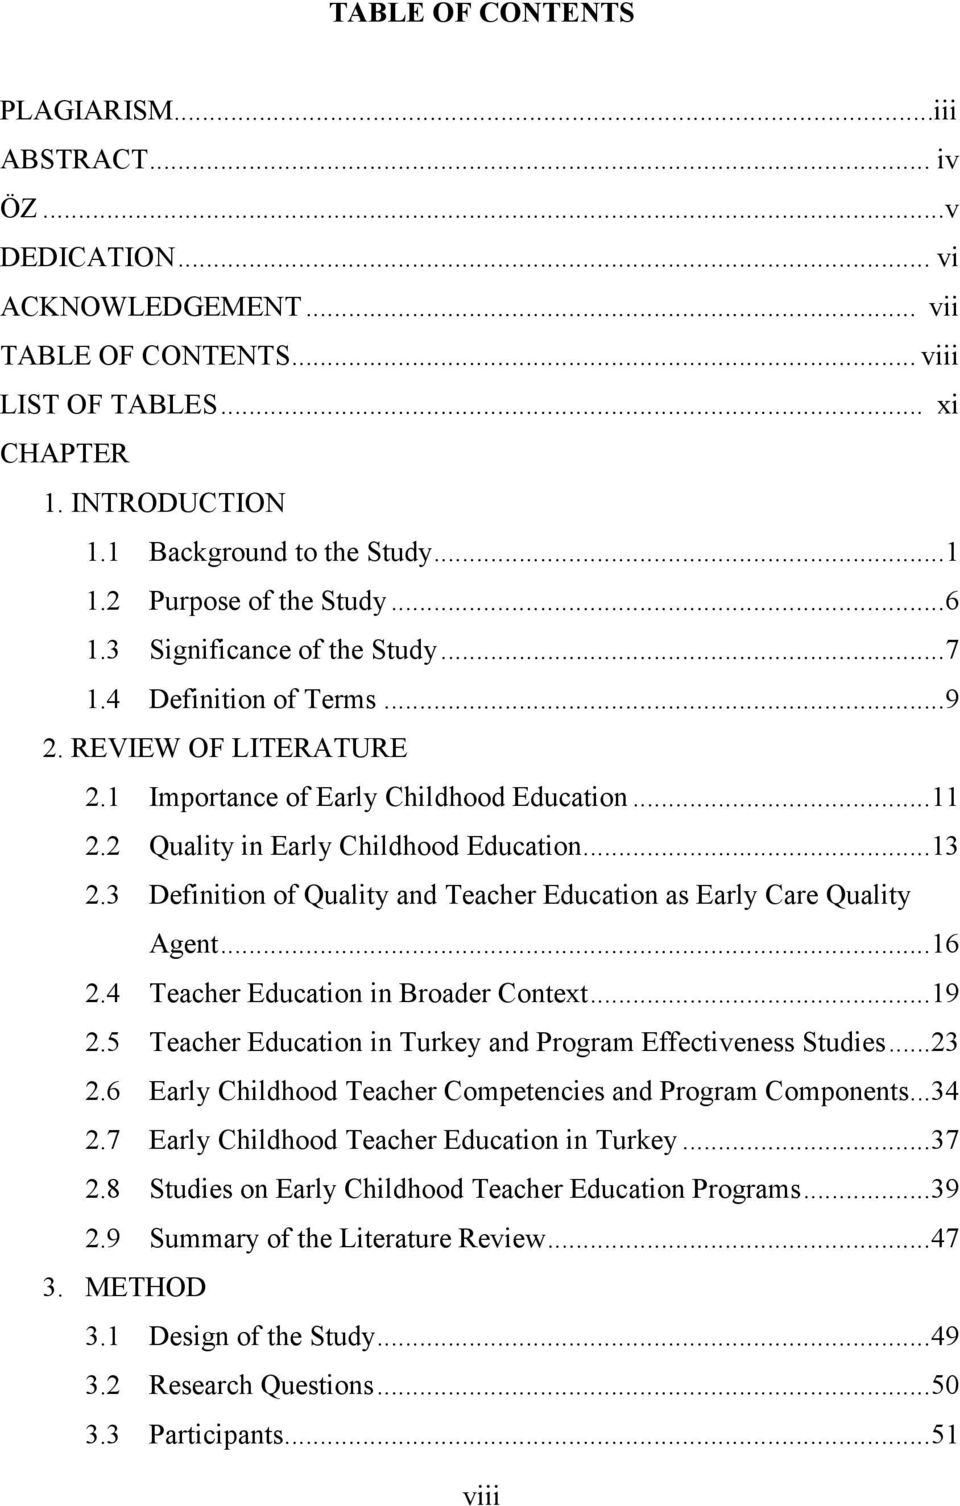 2 Quality in Early Childhood Education... 13 2.3 Definition of Quality and Teacher Education as Early Care Quality Agent... 16 2.4 Teacher Education in Broader Context... 19 2.